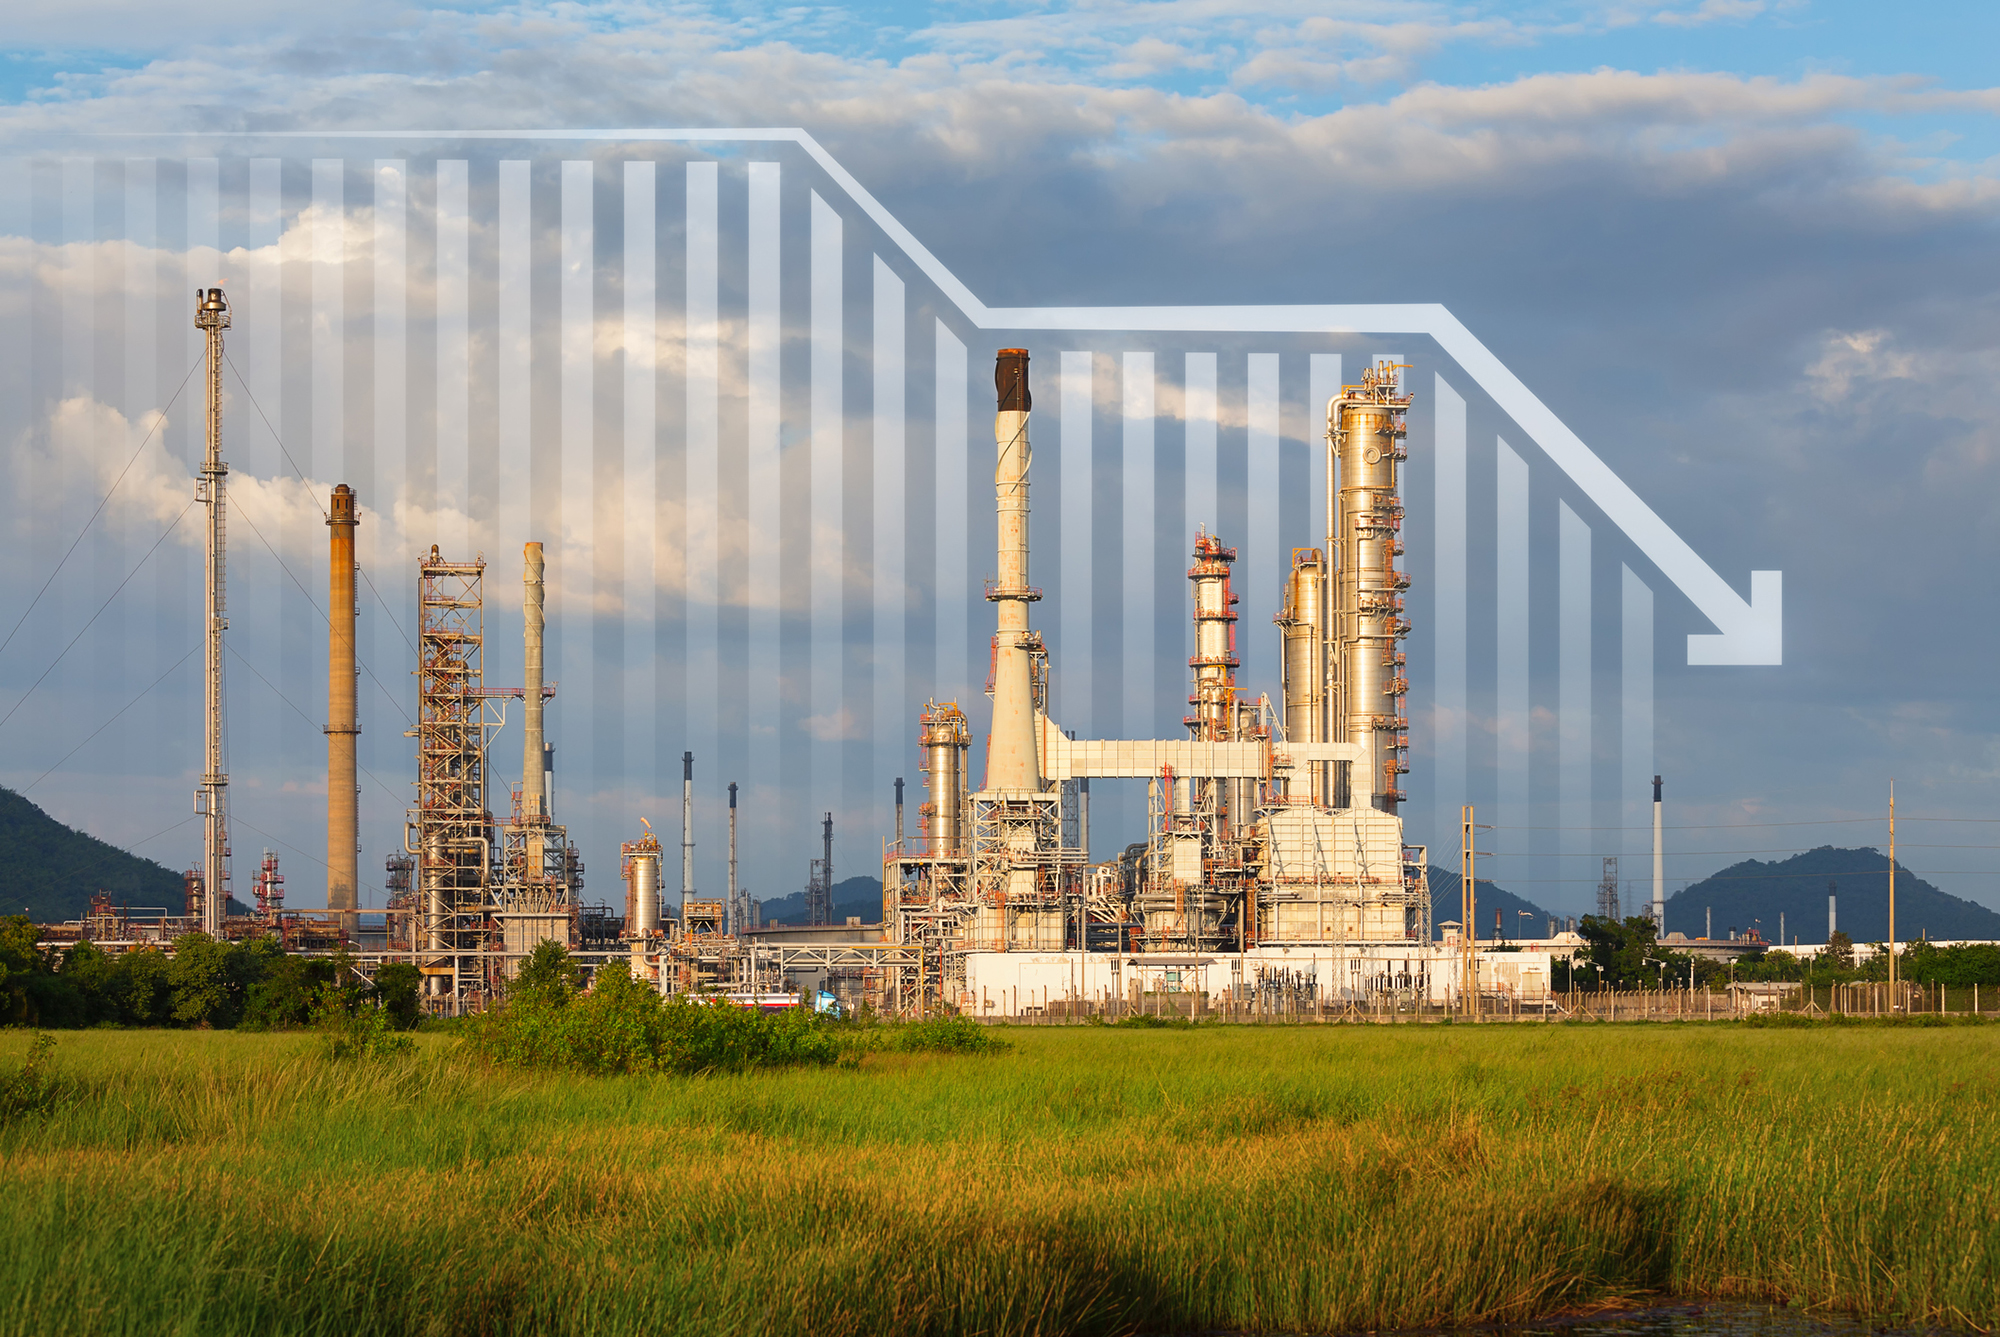 Oil refinery with business analytics overlaid.